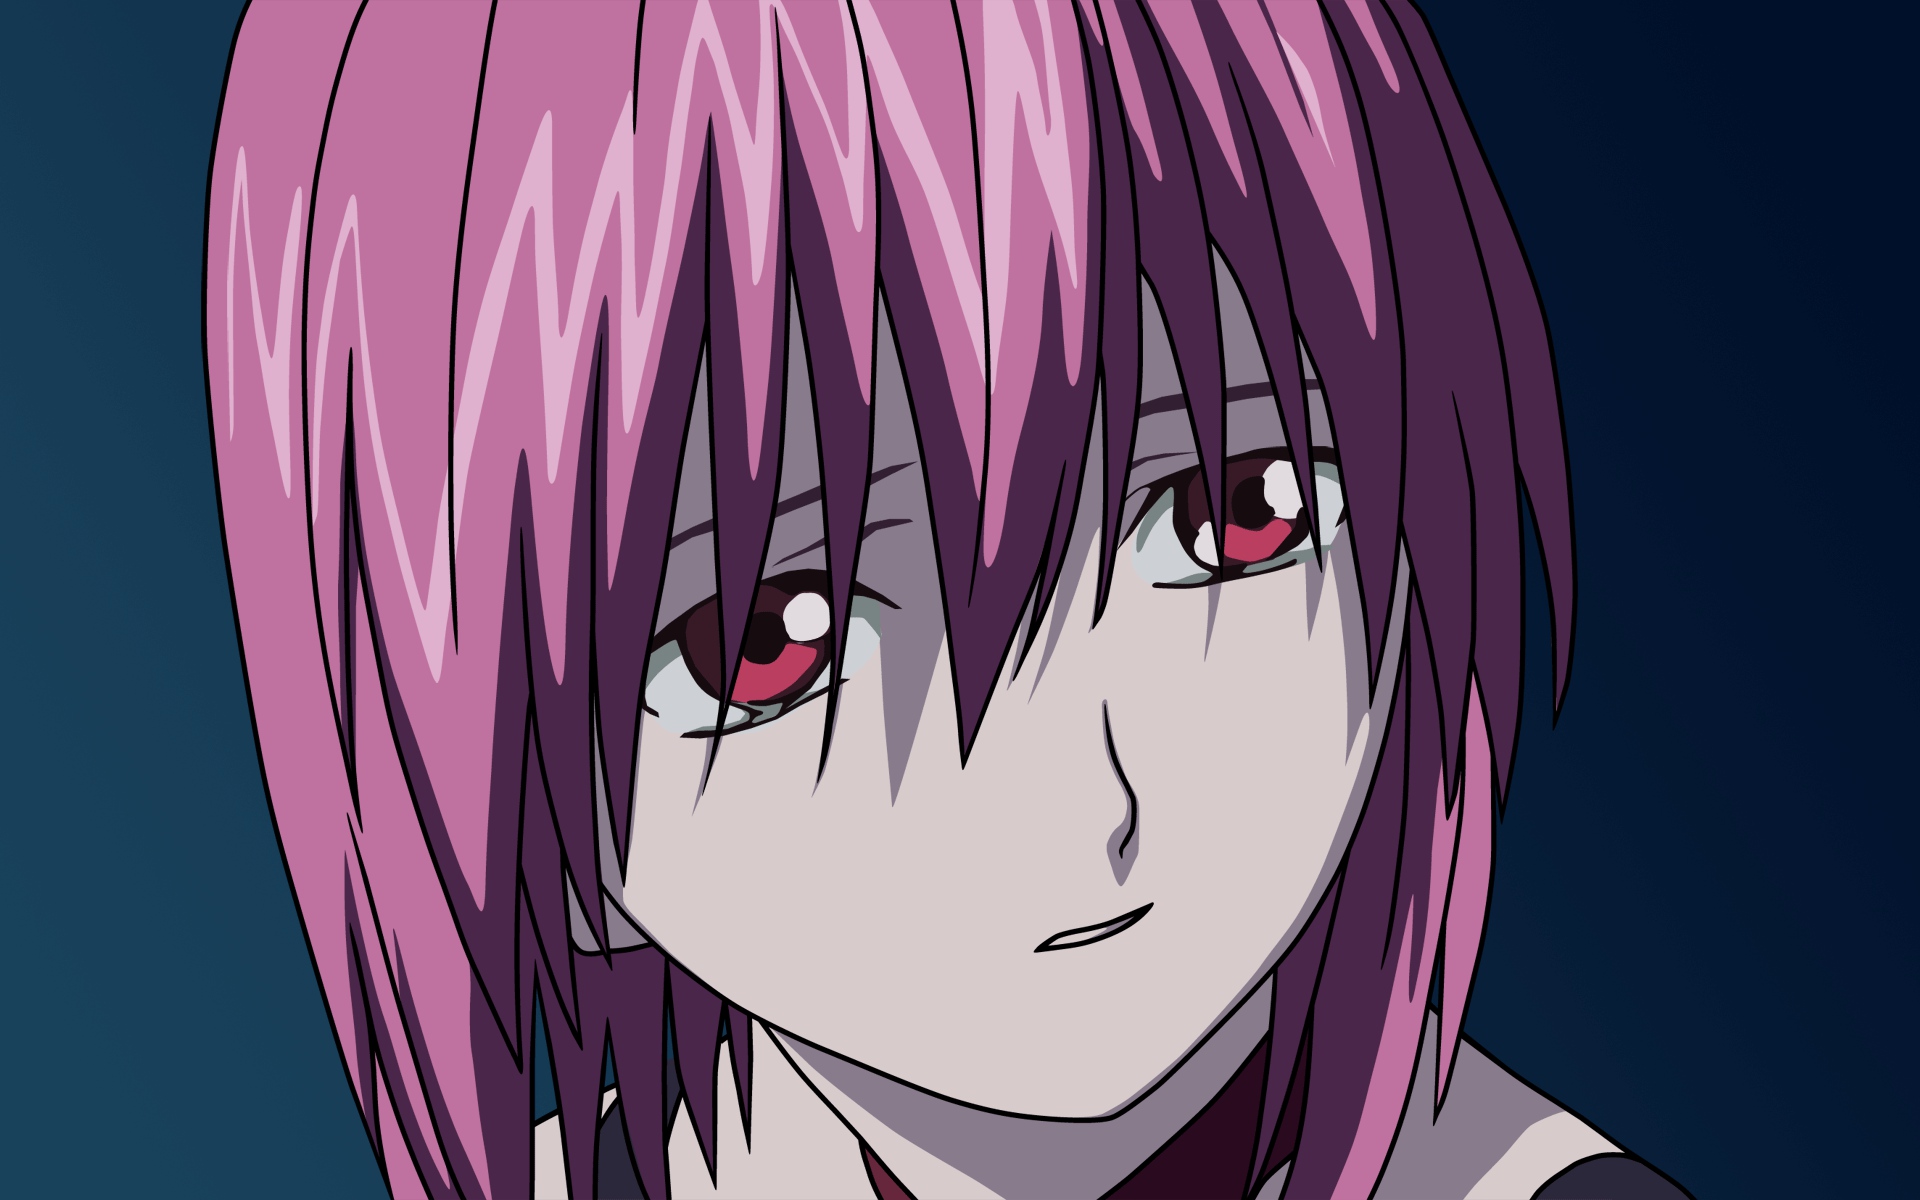 Tokyo Ghoul and Elfen Lied - Forums 